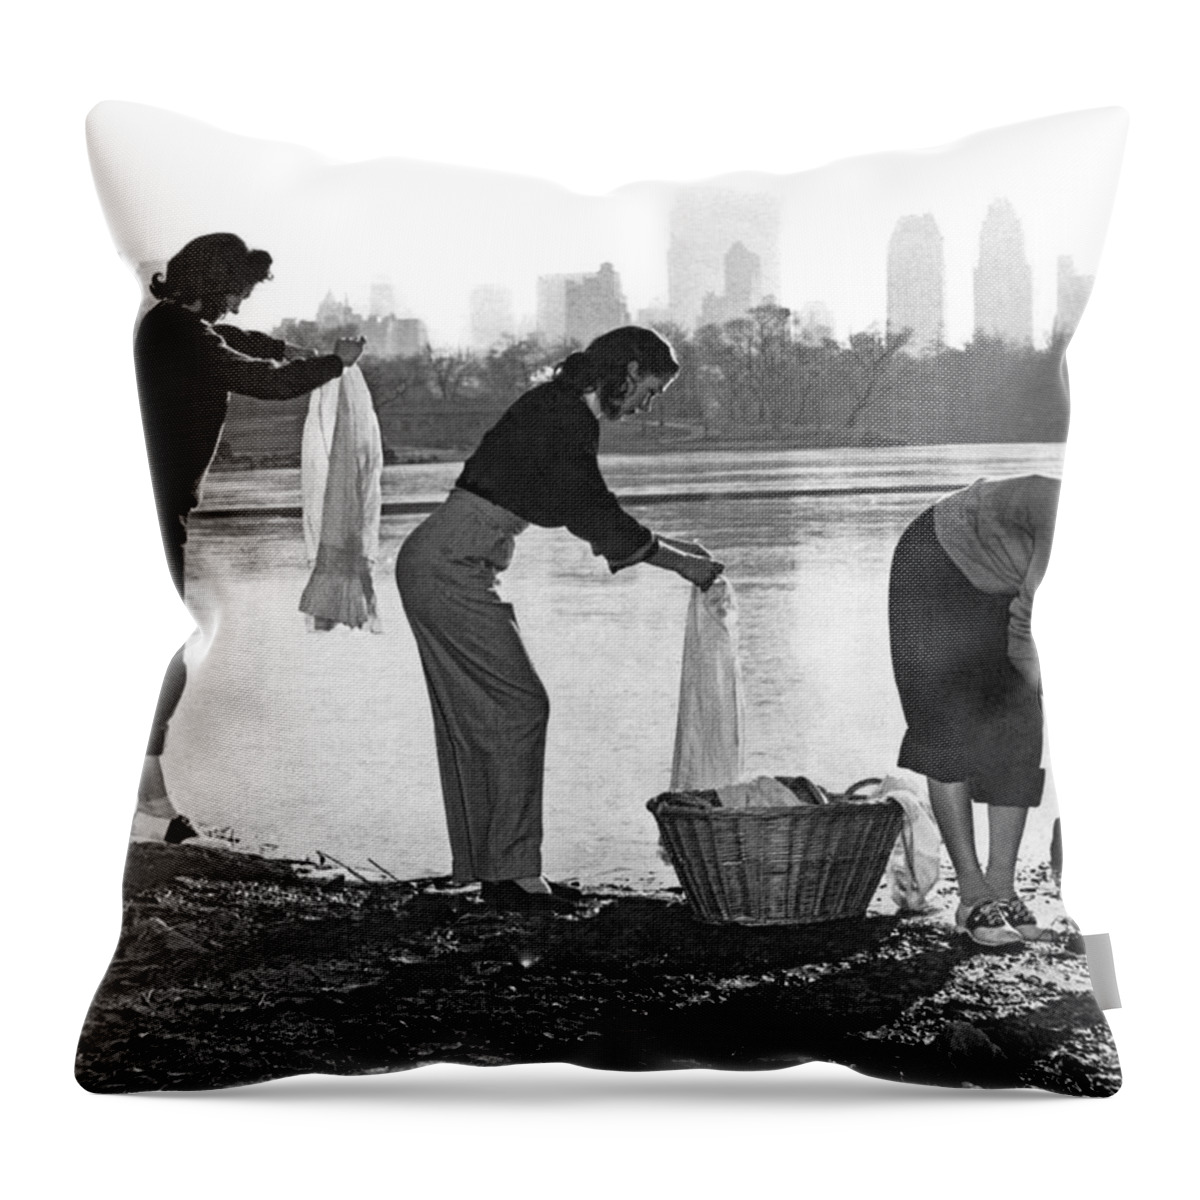 1940's Throw Pillow featuring the photograph Doing Laundry In Central Park by Underwood Archives